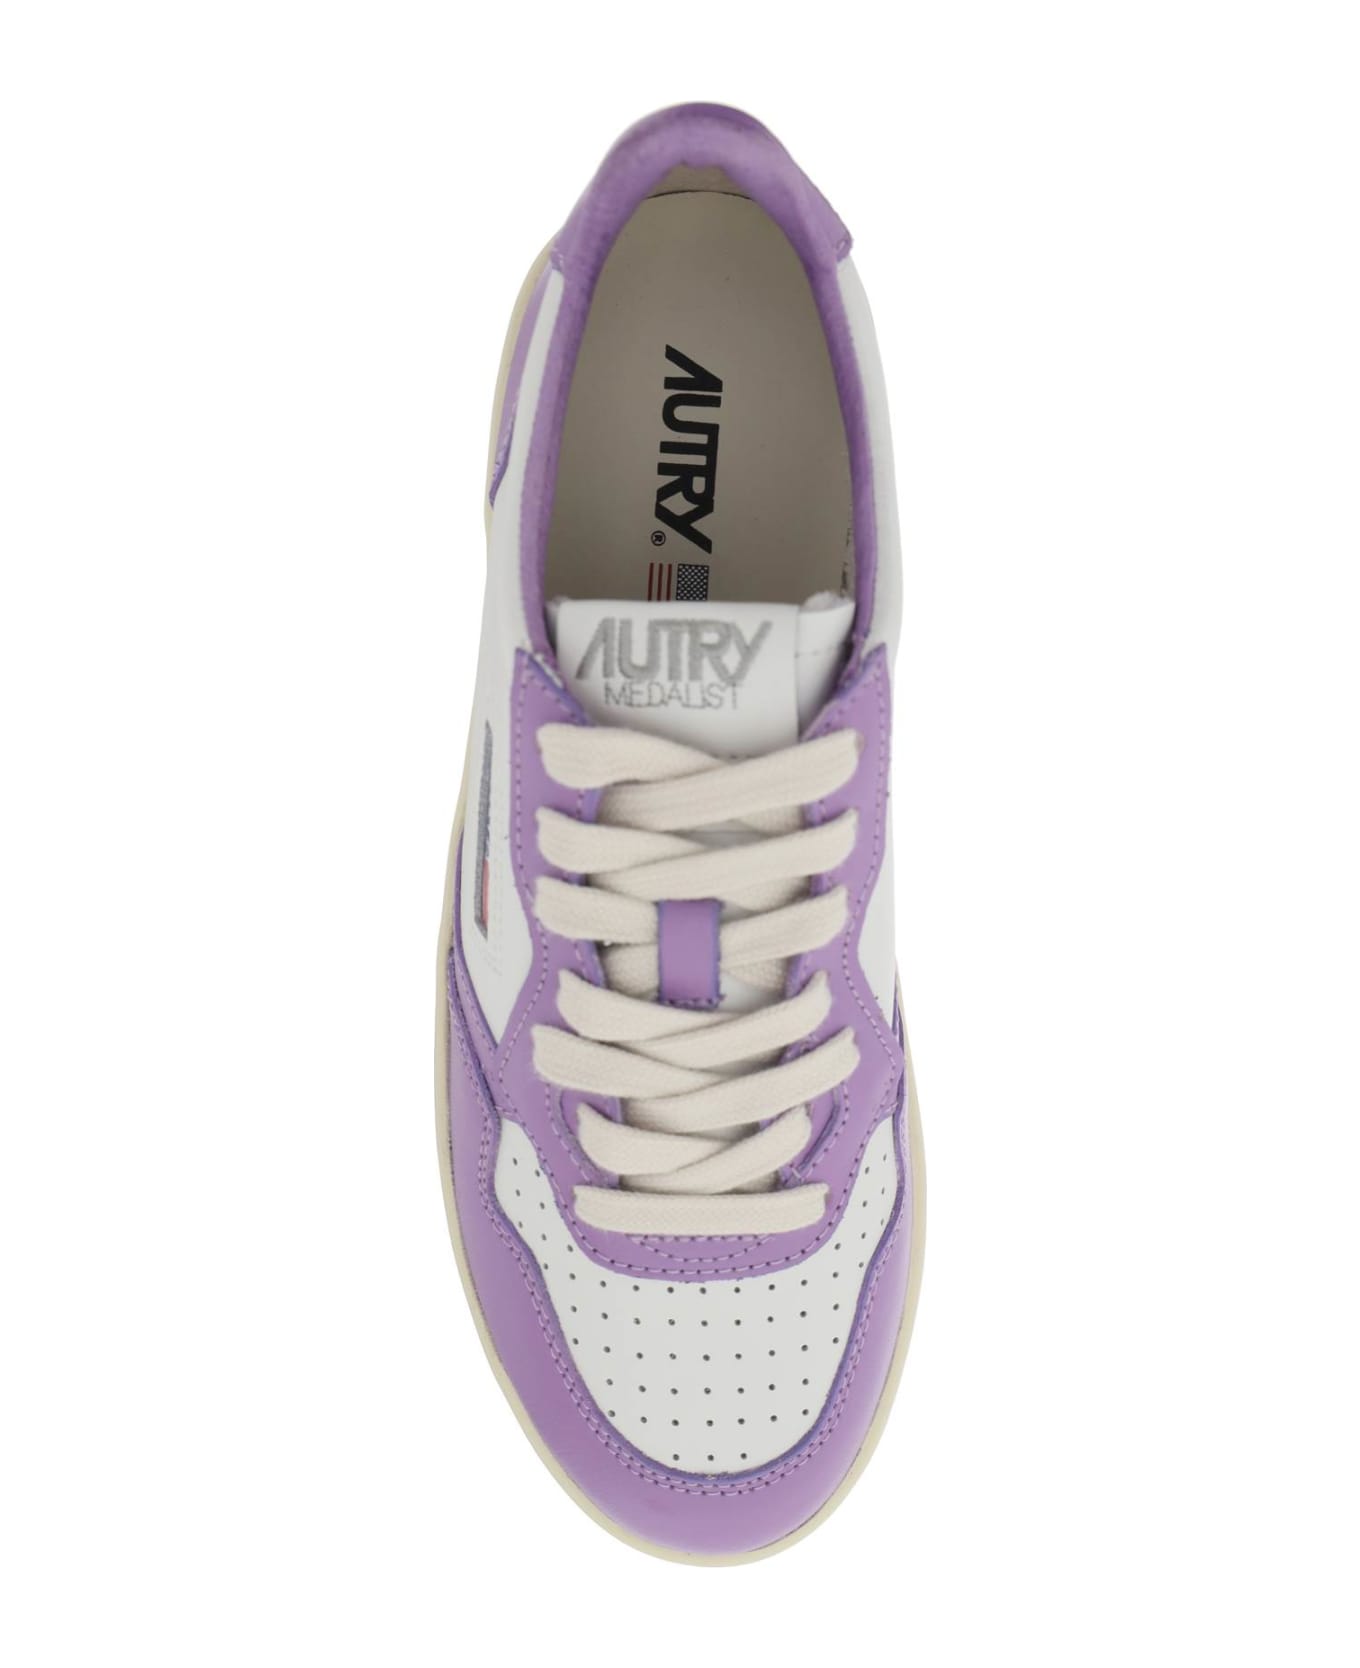 Autry Medalist Low Sneakers - WHITE ENG LAV (White)